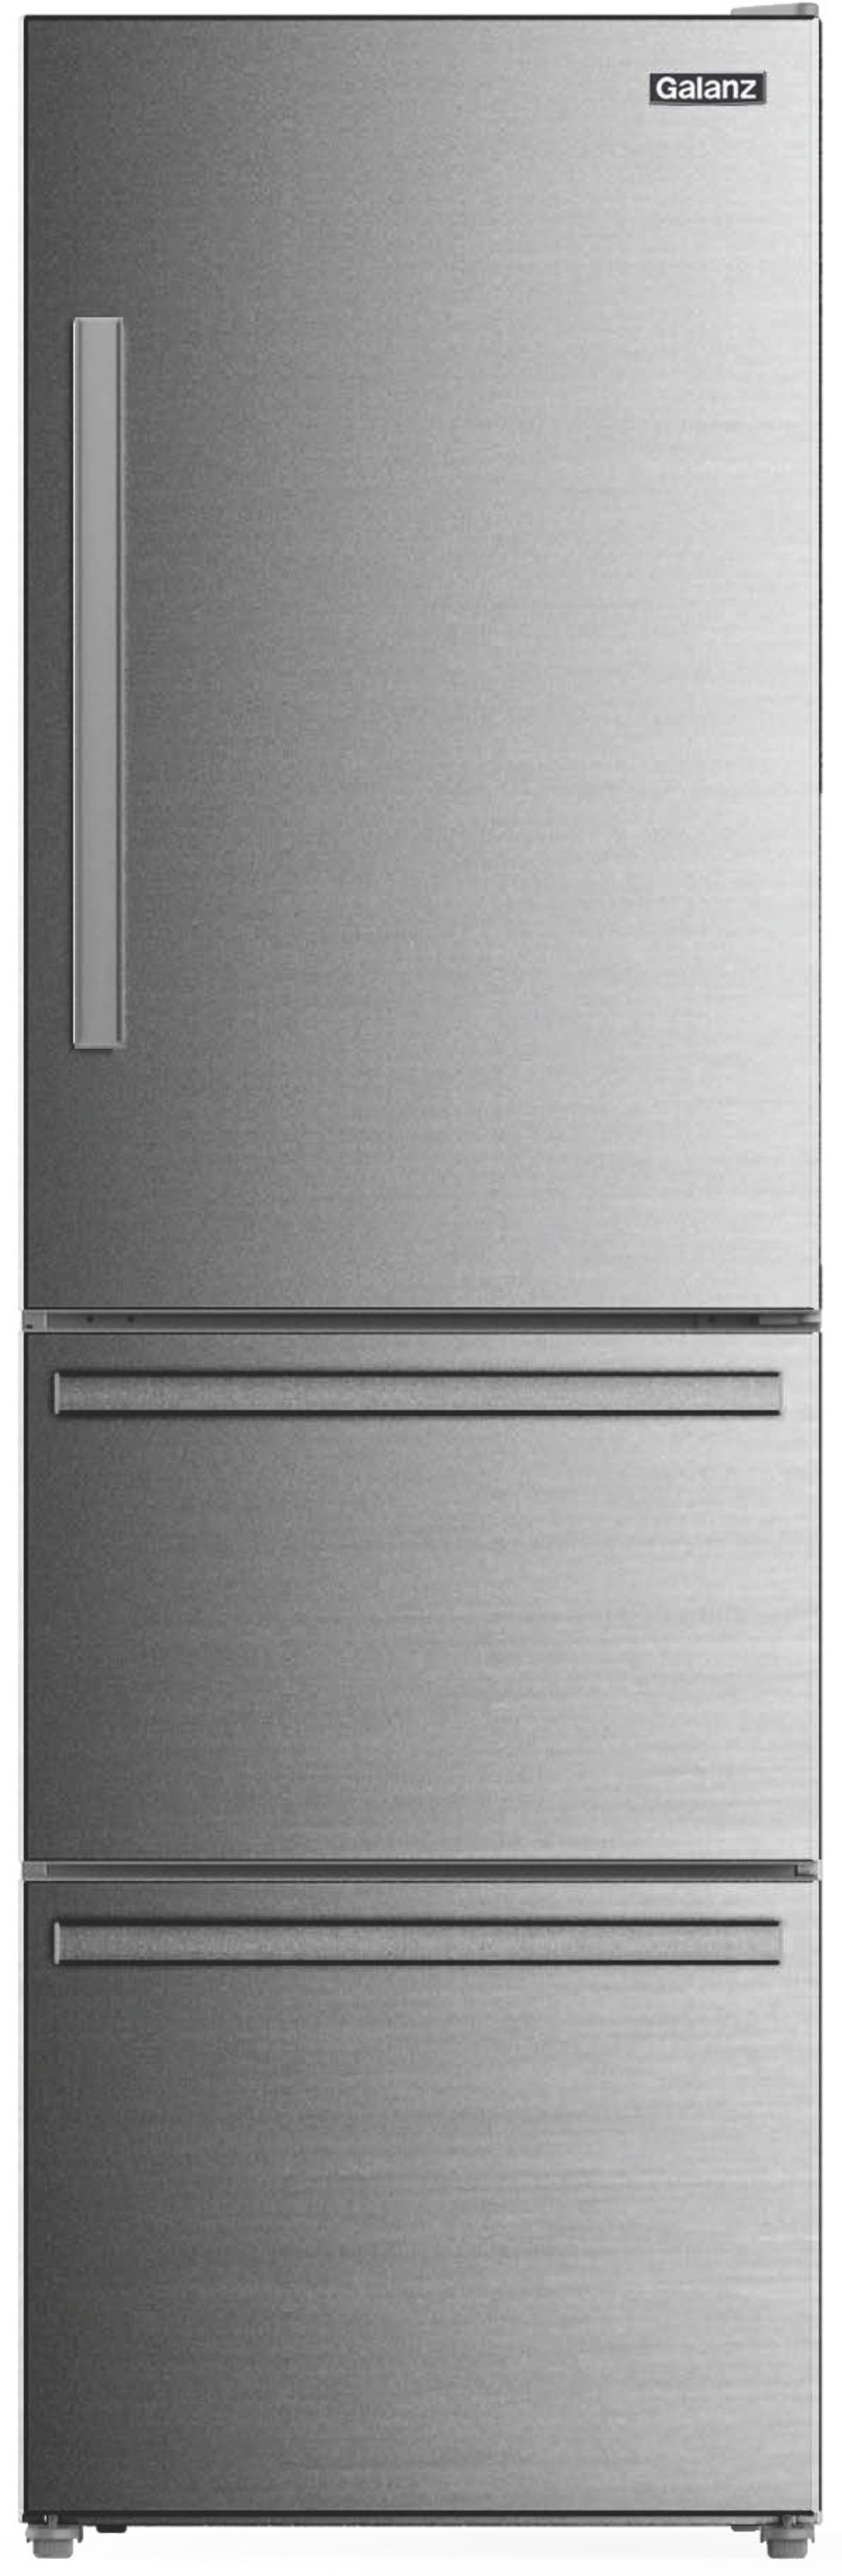 Galanz 12 Cu Ft Top Freezer Refrigerator, Frost Free, Stainless Look, Silver